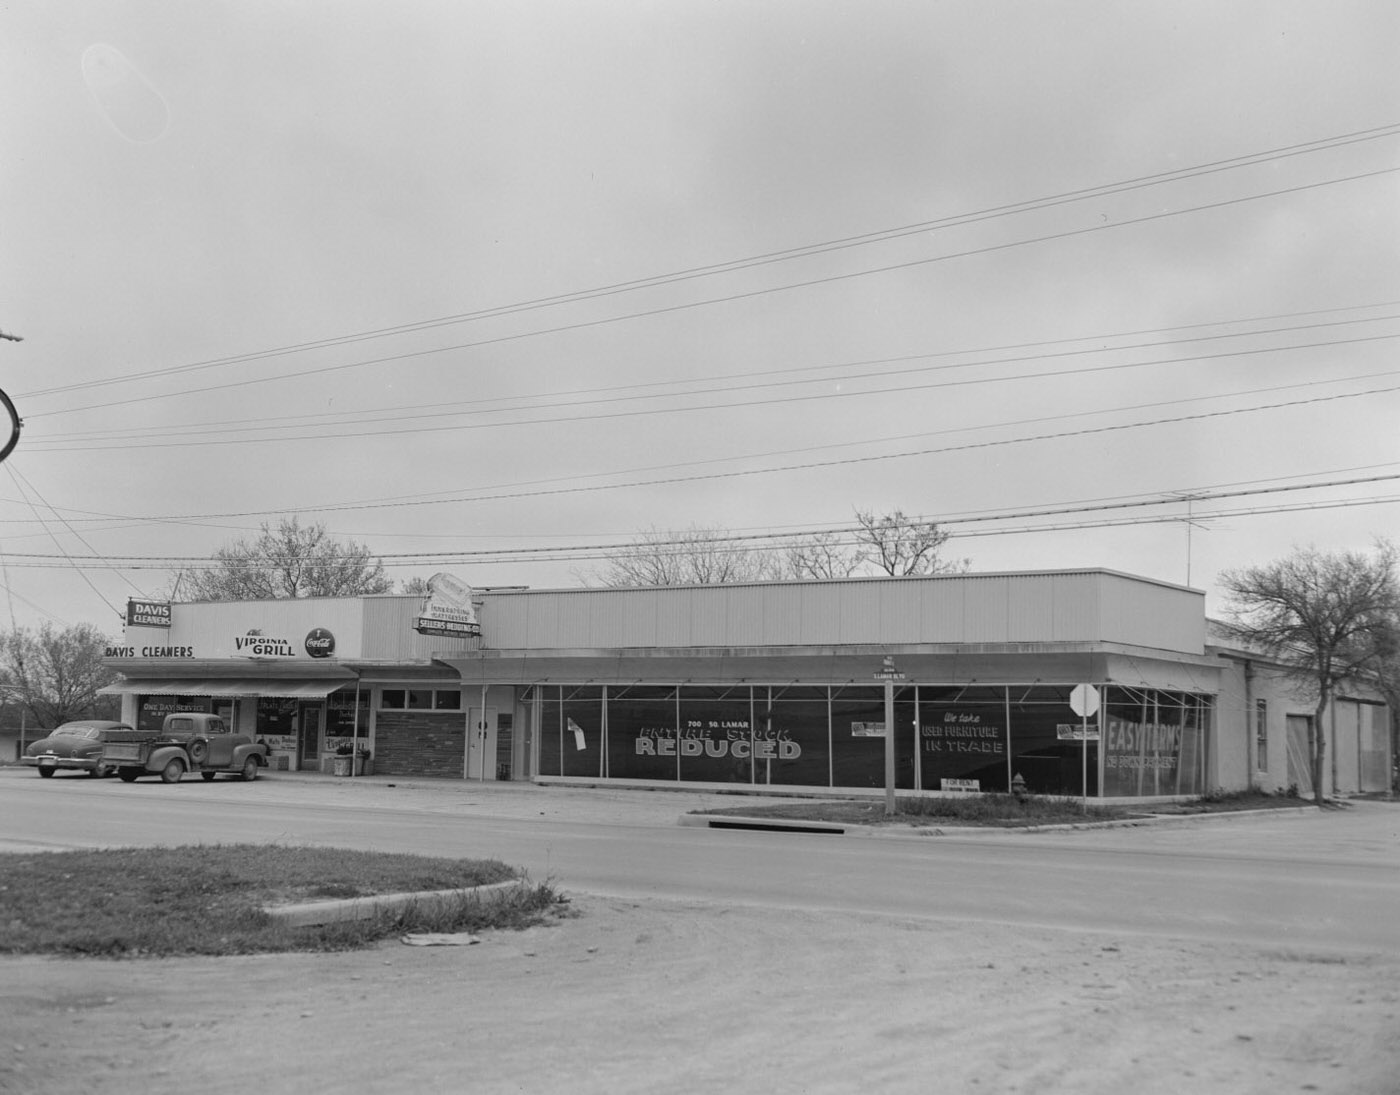 South Lamar Building, Shops Including Davis Cleaners and Virginia Grill, 1958.